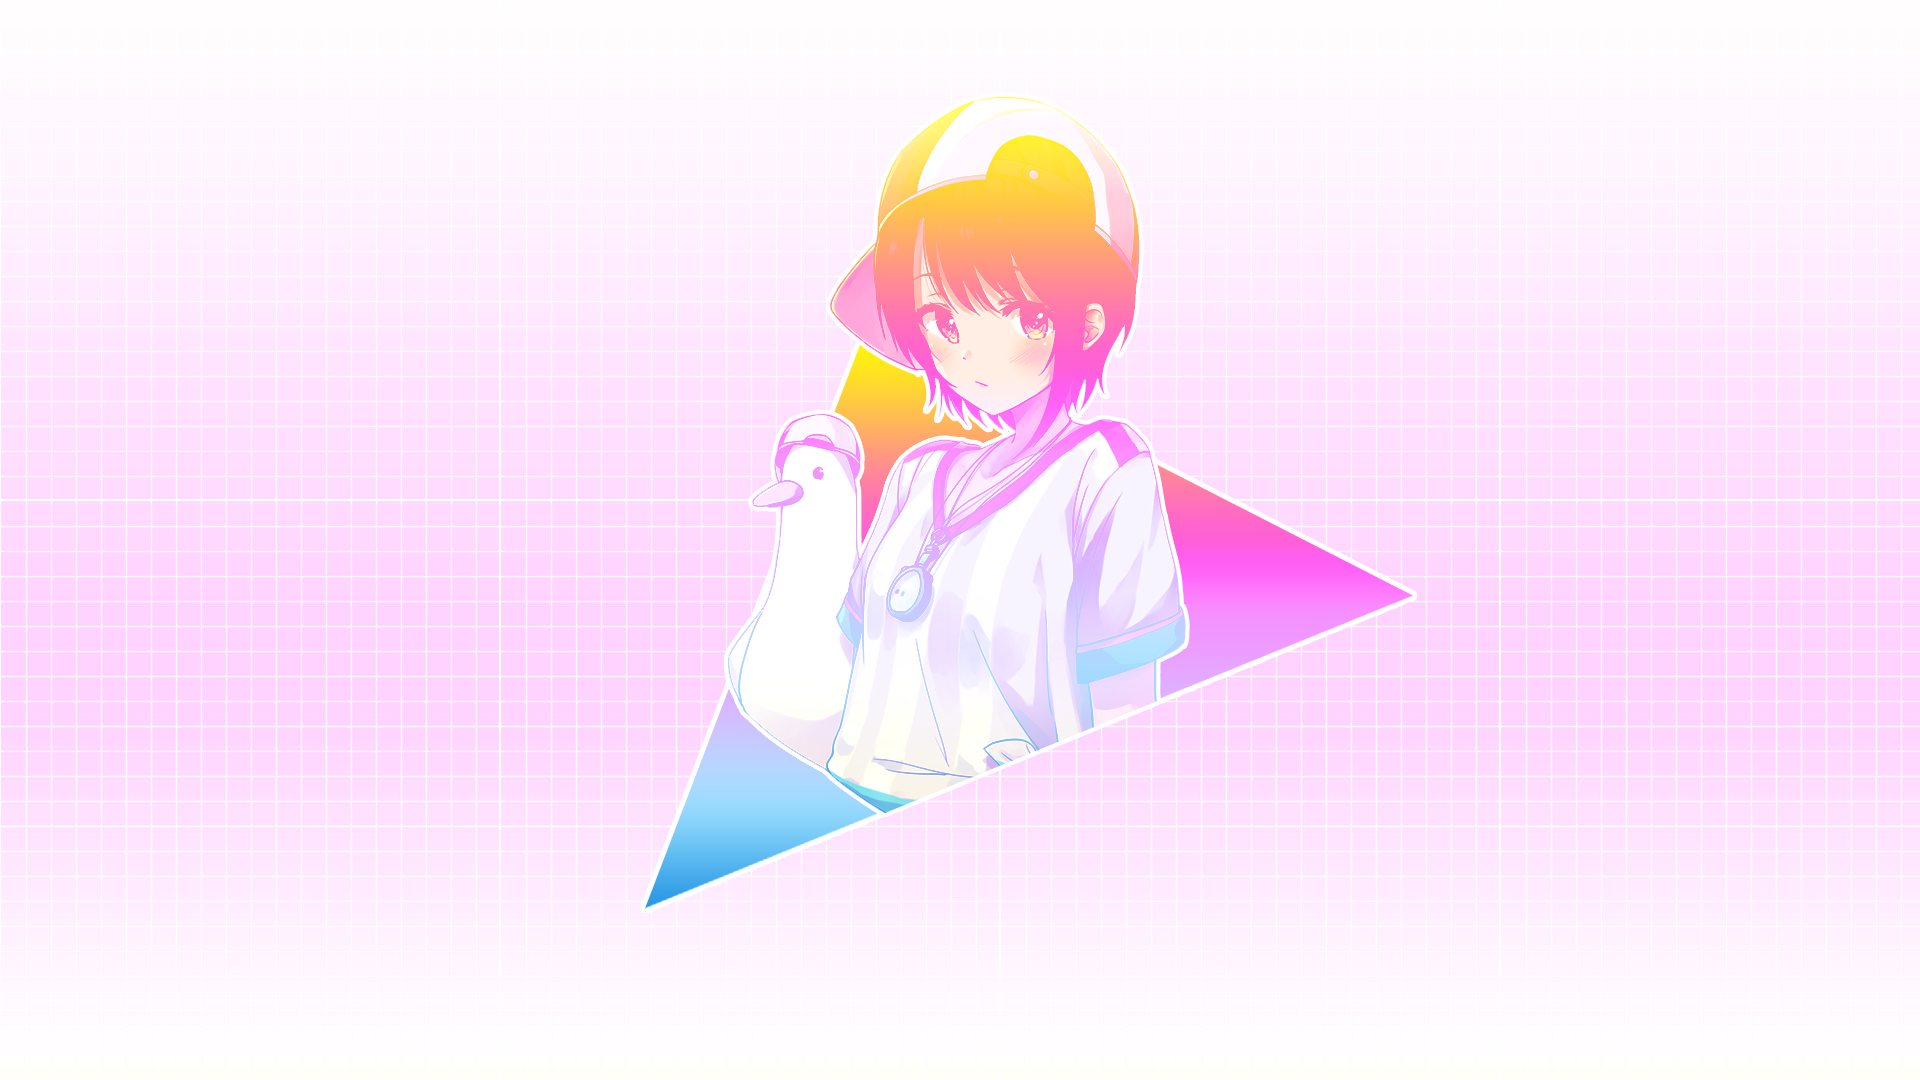 Vaporwave Subaru Wallpaper [Made by me] [Center drawing credits to the author on pivix]: Hololive